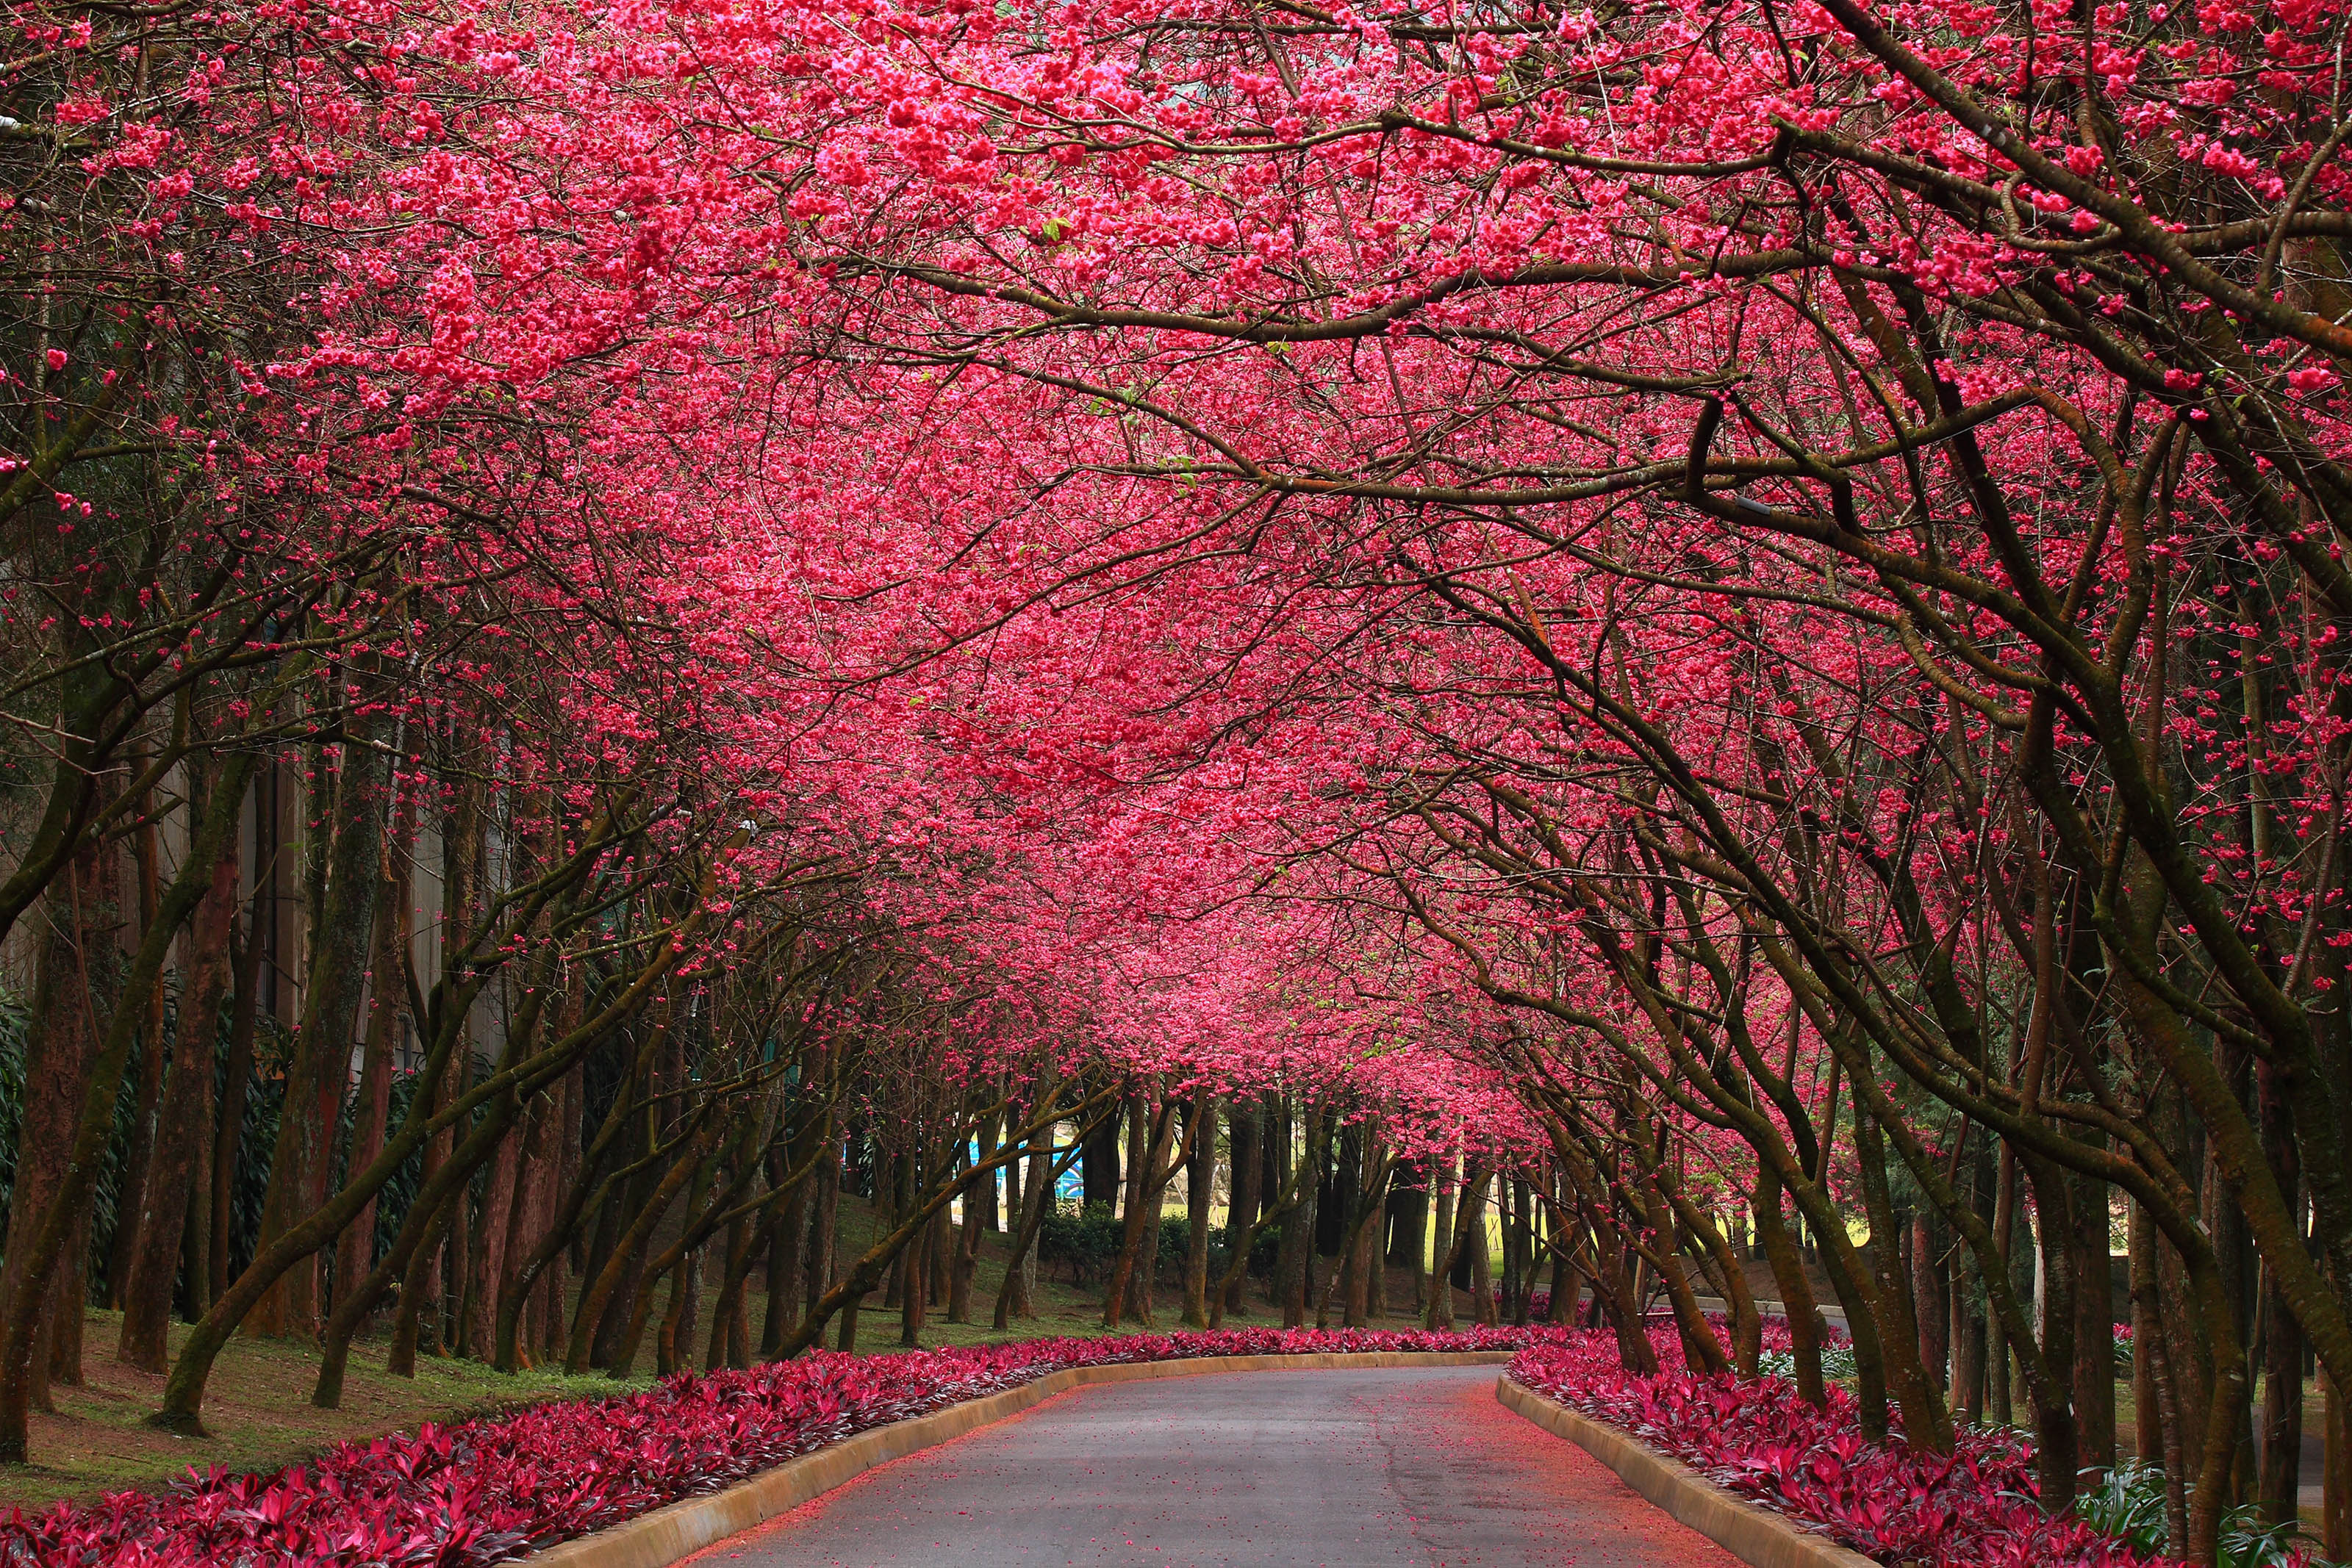 Nature Wallpaper in HD with Flowering Trees in Pink HD